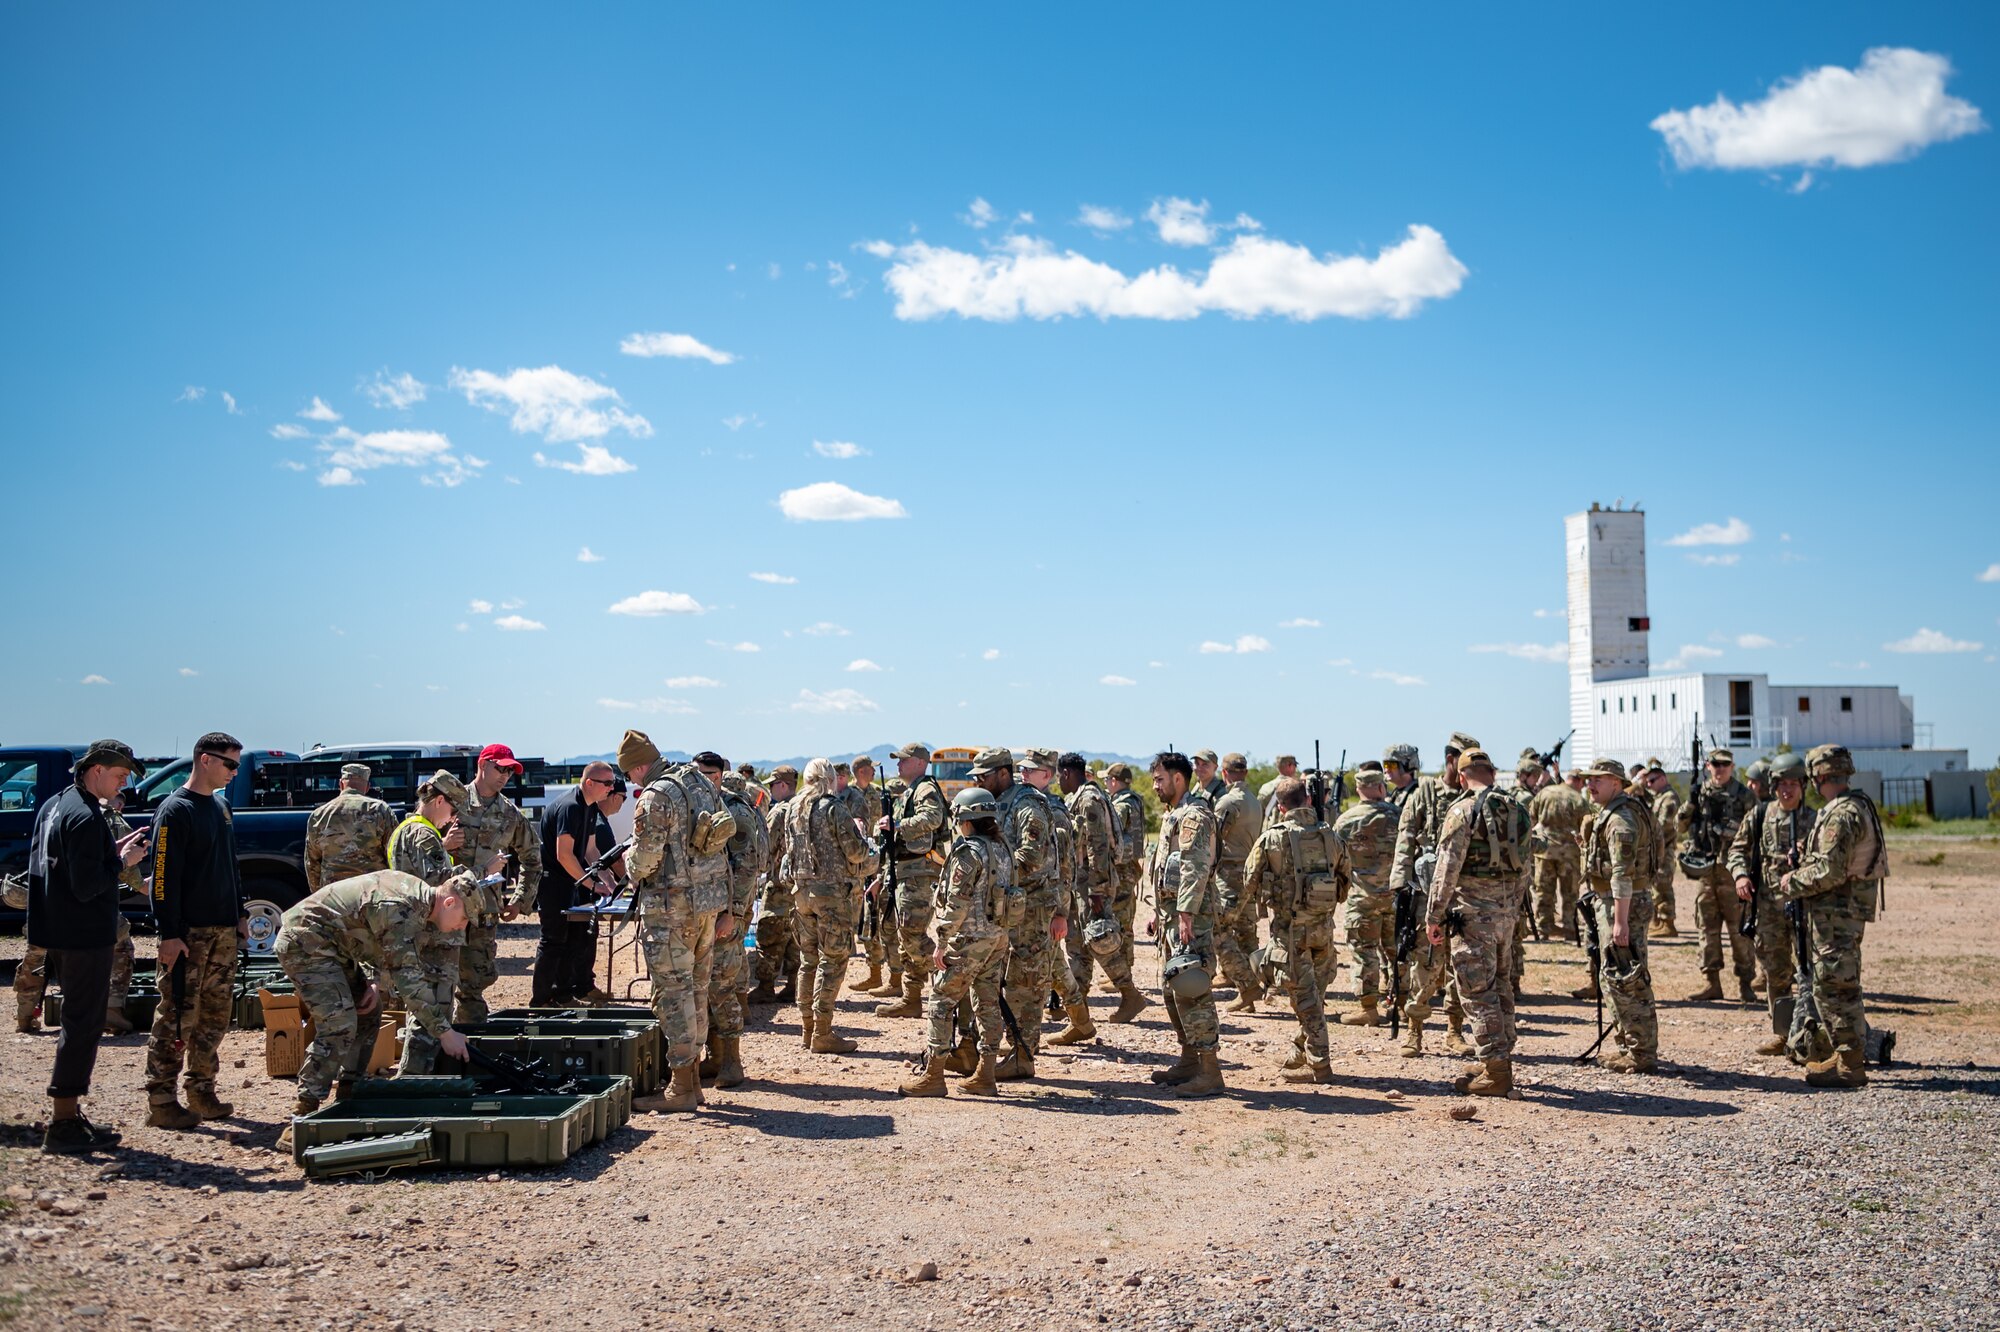 More than 75 Reserve Citizen Airmen of the 944th Fighter Wing, along with 10 Airmen from the 56th Fighter Wing, conducted ‘Ready Airmen Training’ during what was dubbed “Field Training Exercise Desert Anvil”, the first of its kind hosted by the 944th Mission Support Group with the 944th Aeromedical Staging Squadron at Florence Military Reservation in Florence, Ariz., Apr. 5-6, 2024. The mission of this training was for Airmen to transcend the boundaries of their usual roles and embrace the unpredictability of combat through a rigorous training regimen designed to mirror the complexities of modern warfare. (U.S. Air Force photo by Tech. Sgt. Tyler J. Bolken)